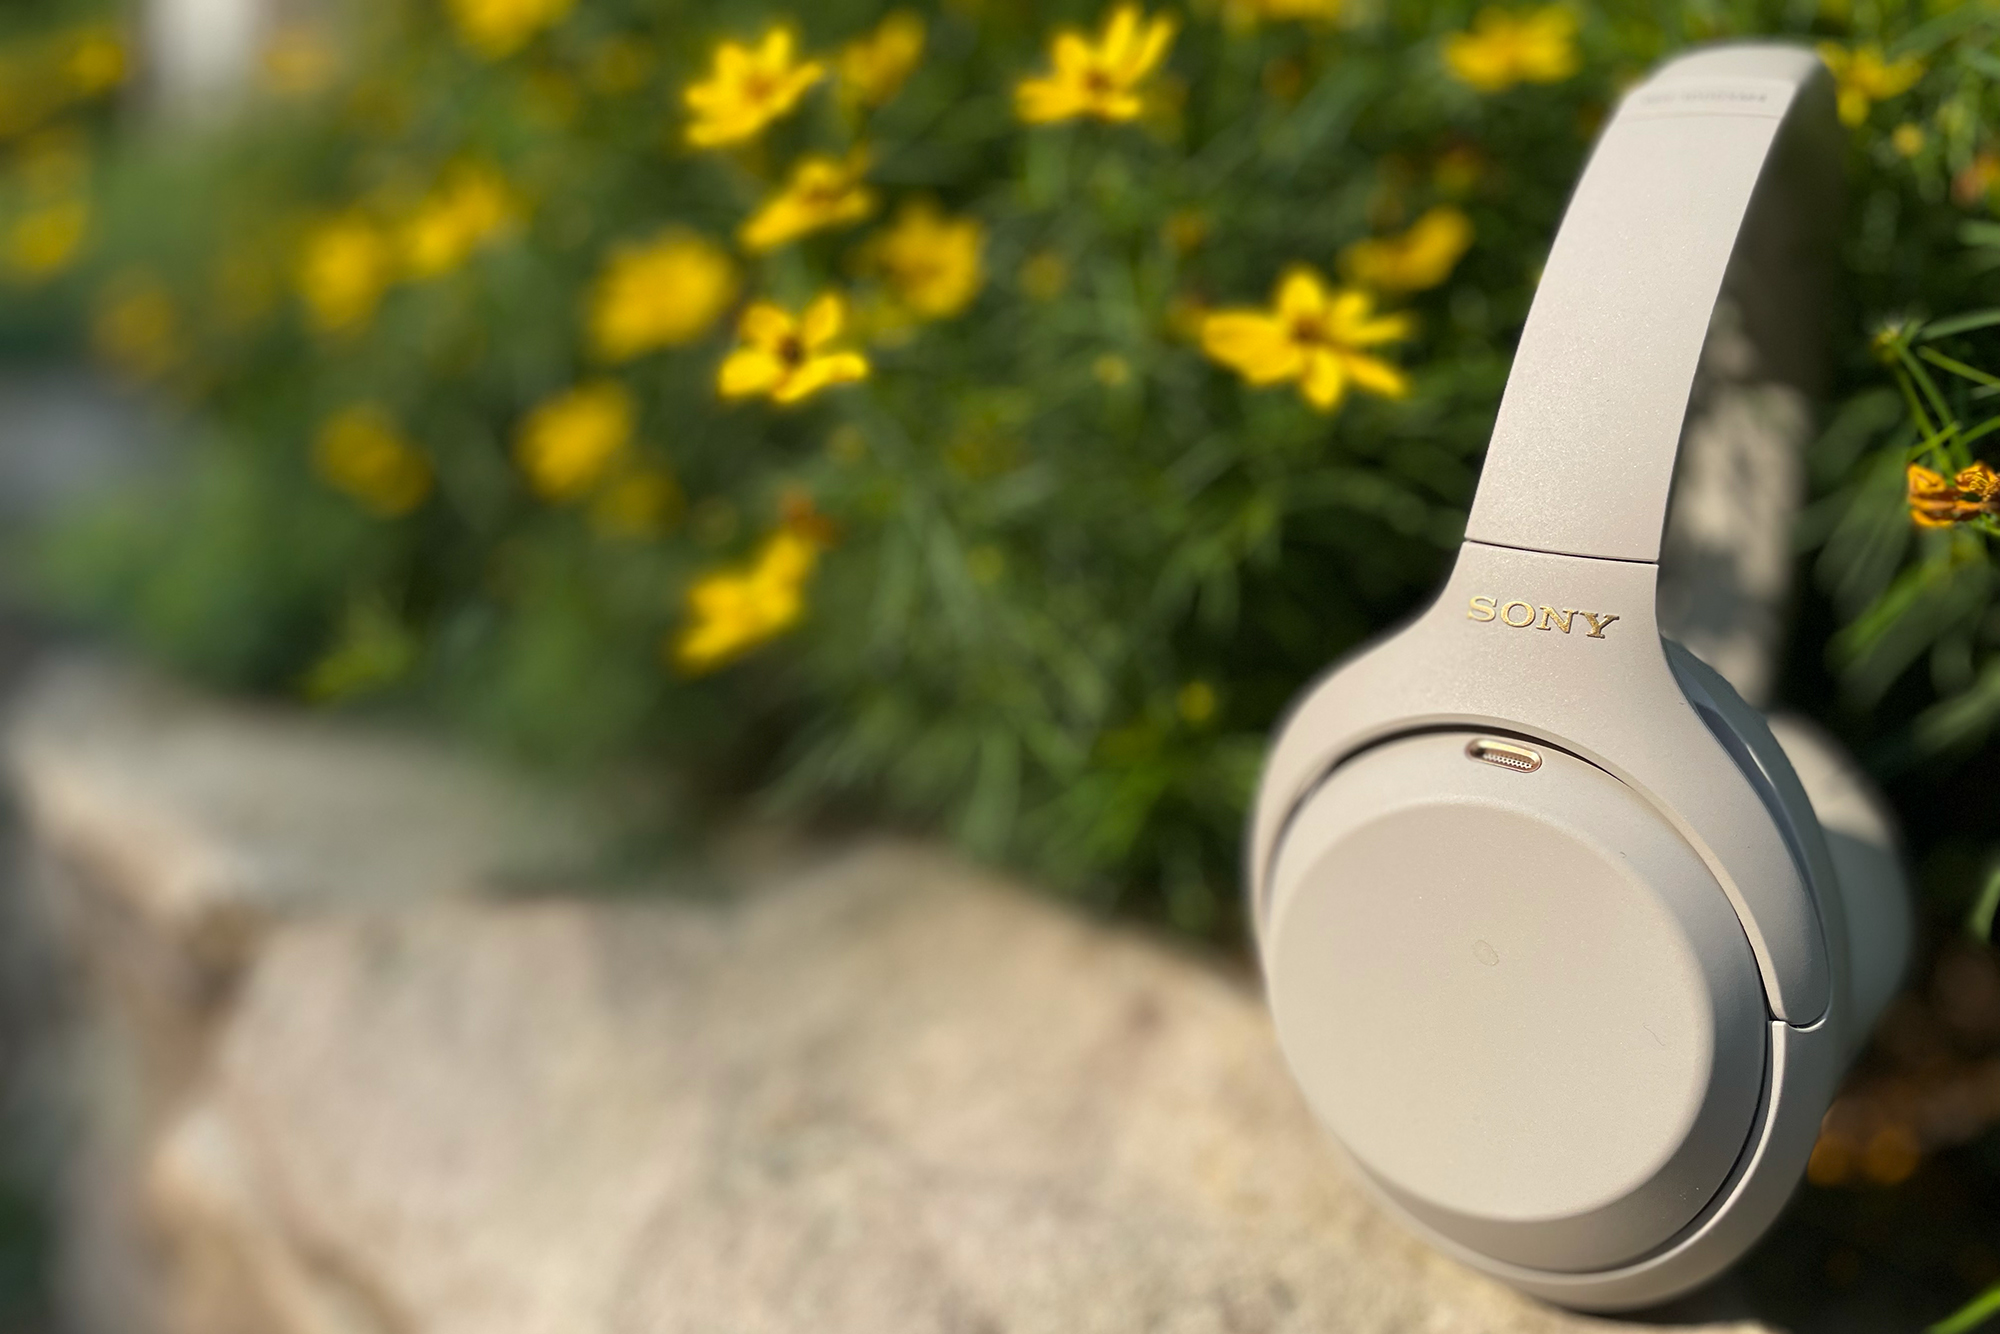 Sony WH-1000XM4 Noise-Canceling Headphones Review